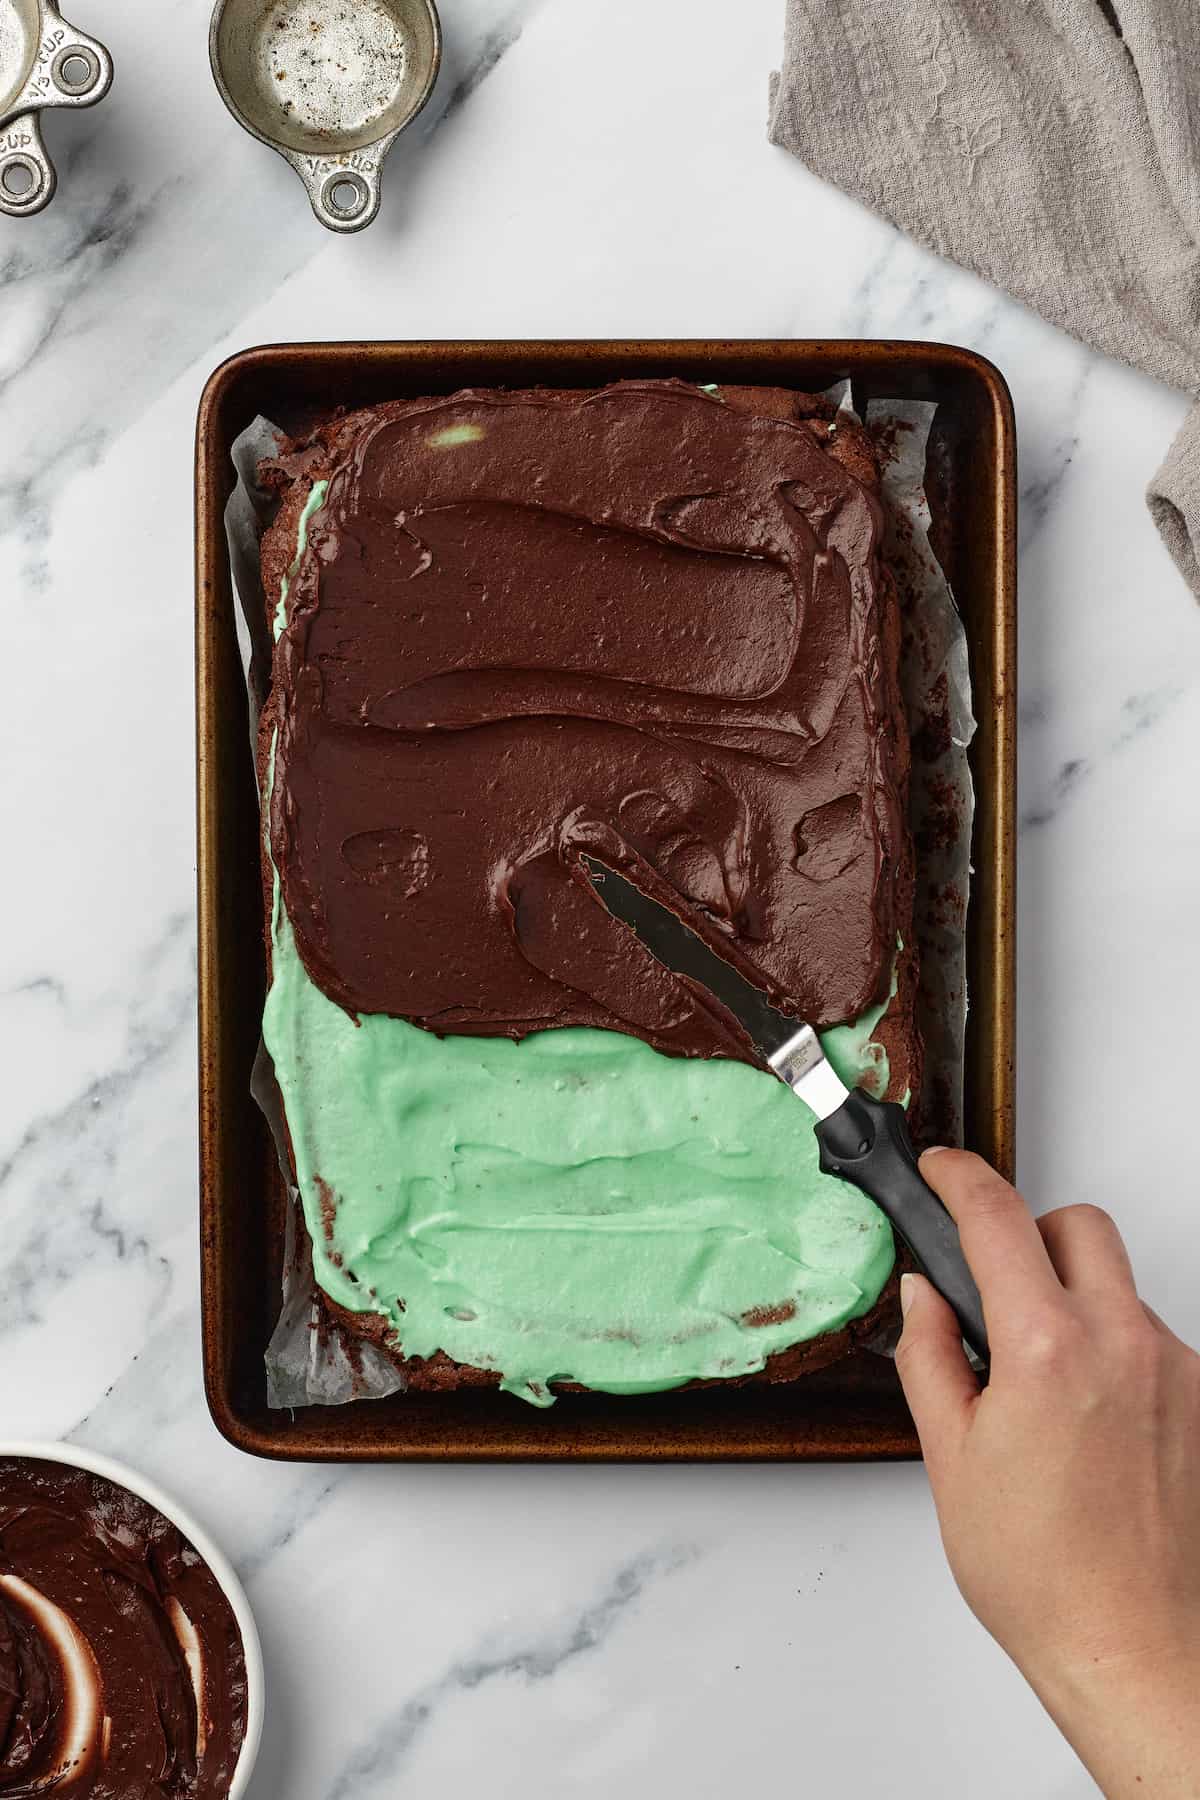 Chocolate frosting being spread onto a batch of brownies topped with mint frosting